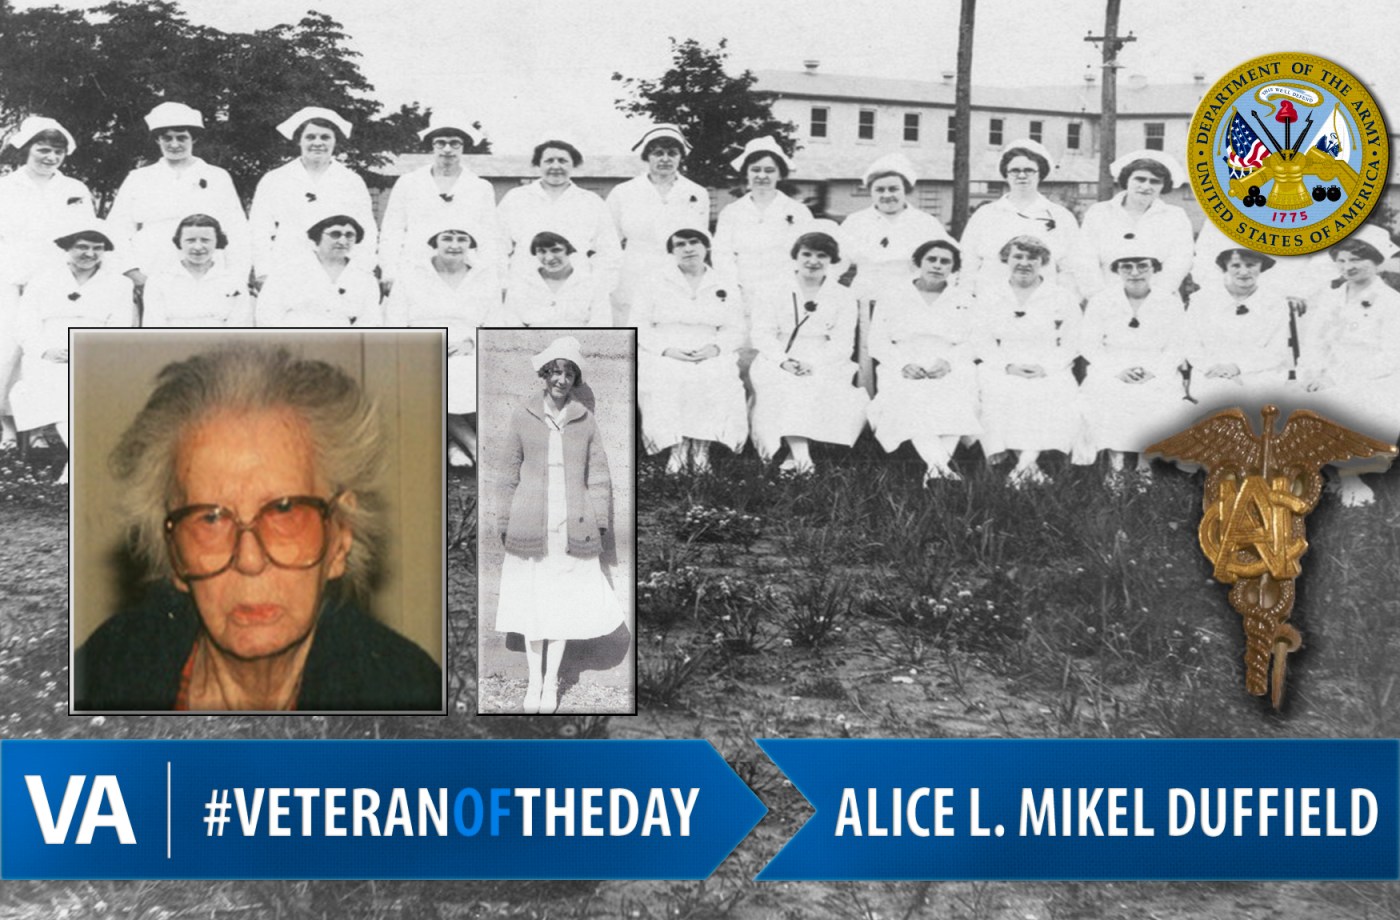 Alice L. Mikel Duffield - Veteran of the Day